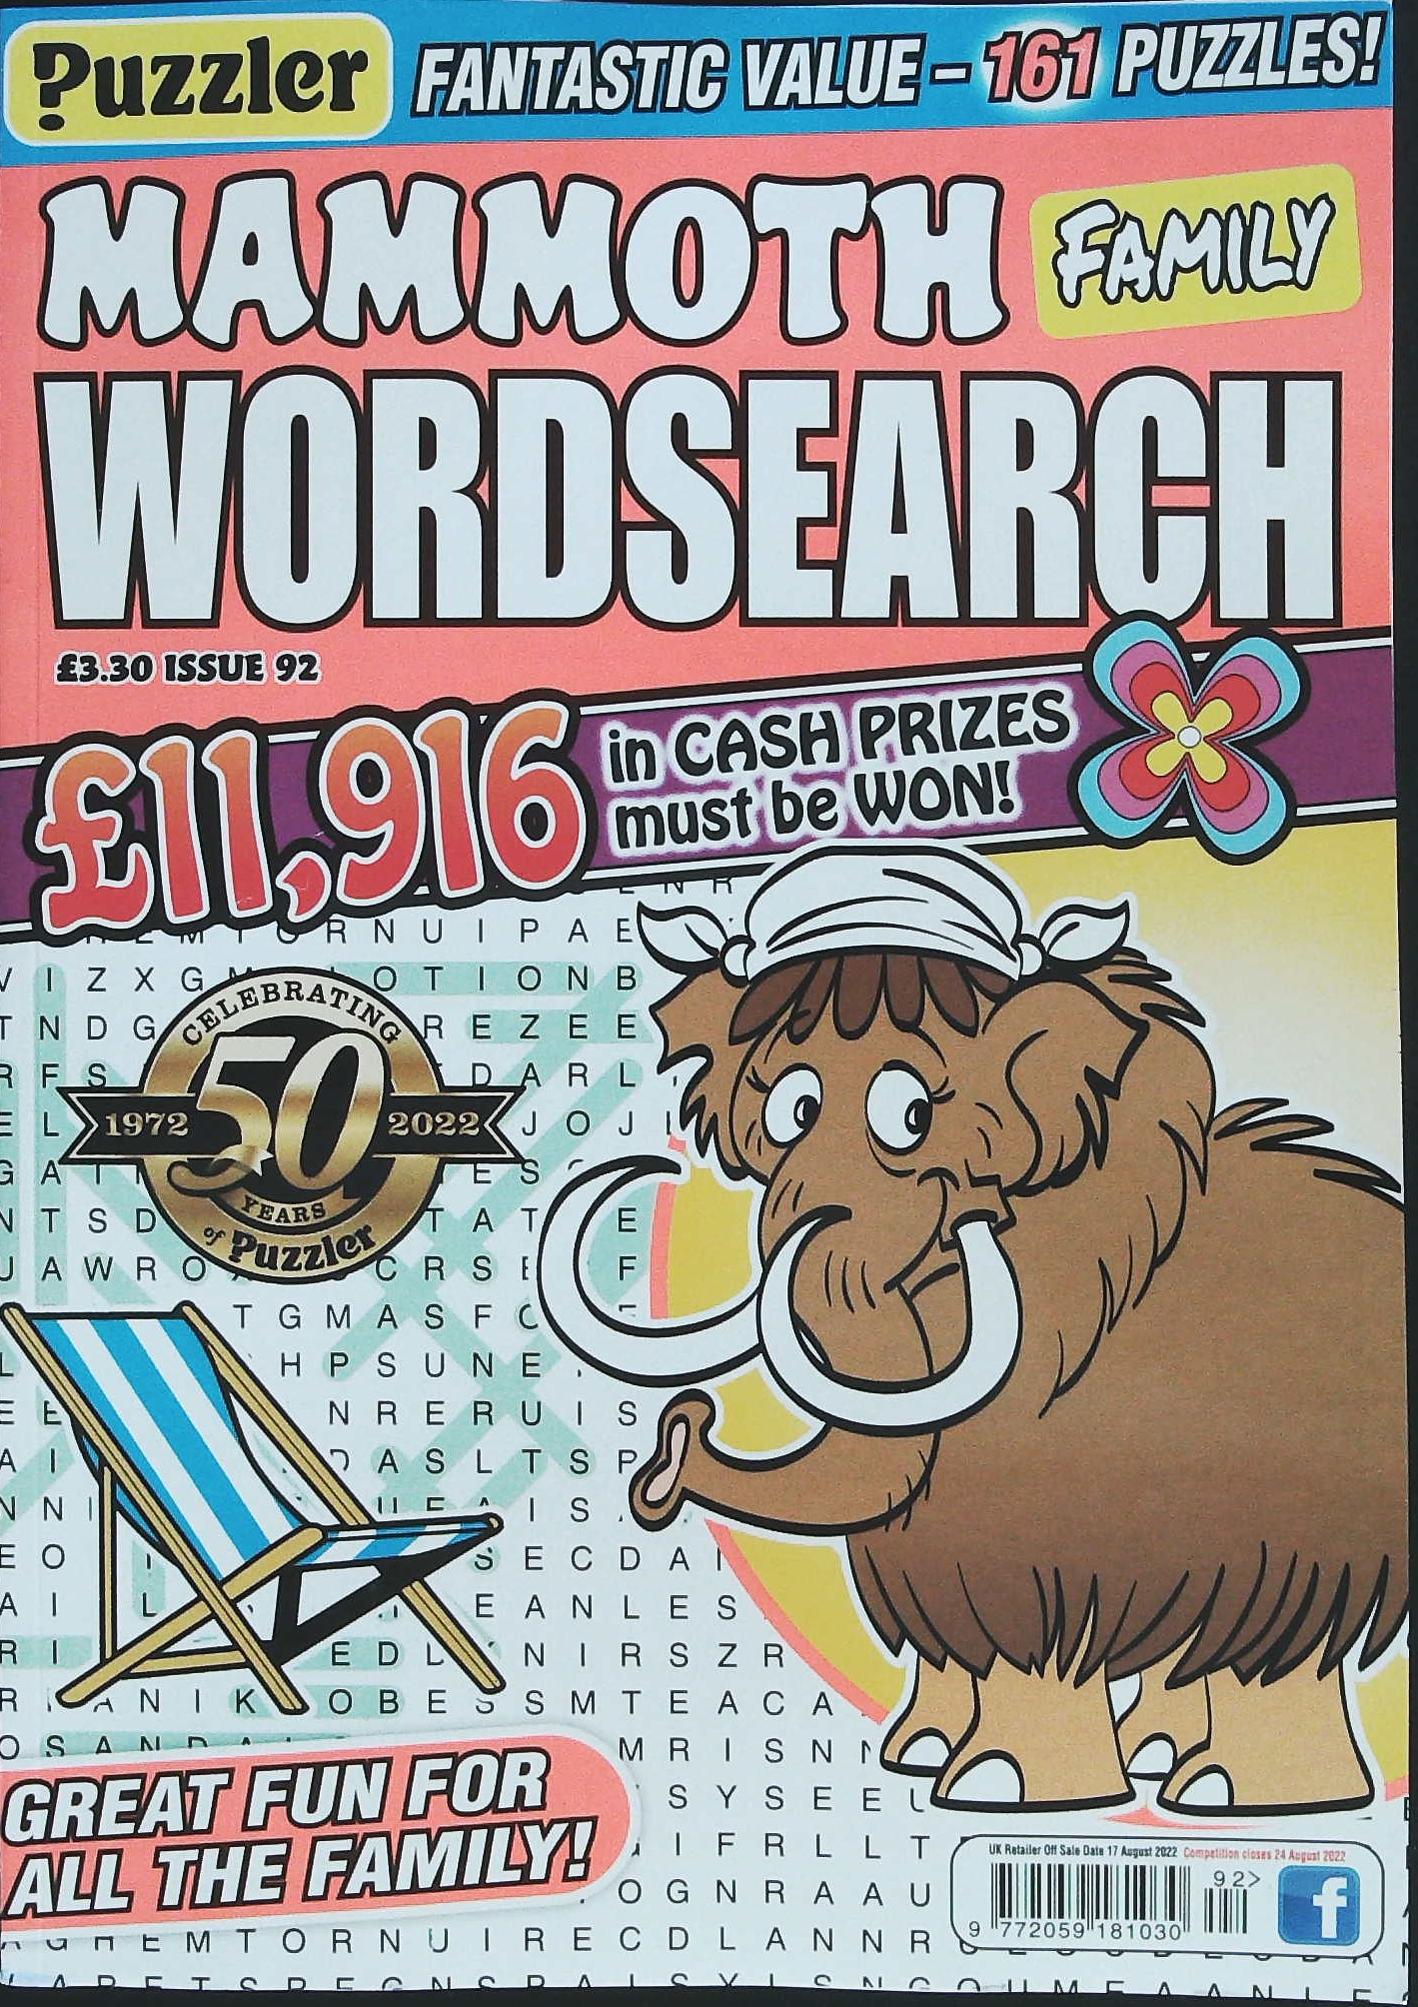 PUZZLE MAMMOTH FAMILY WORDSEARCH